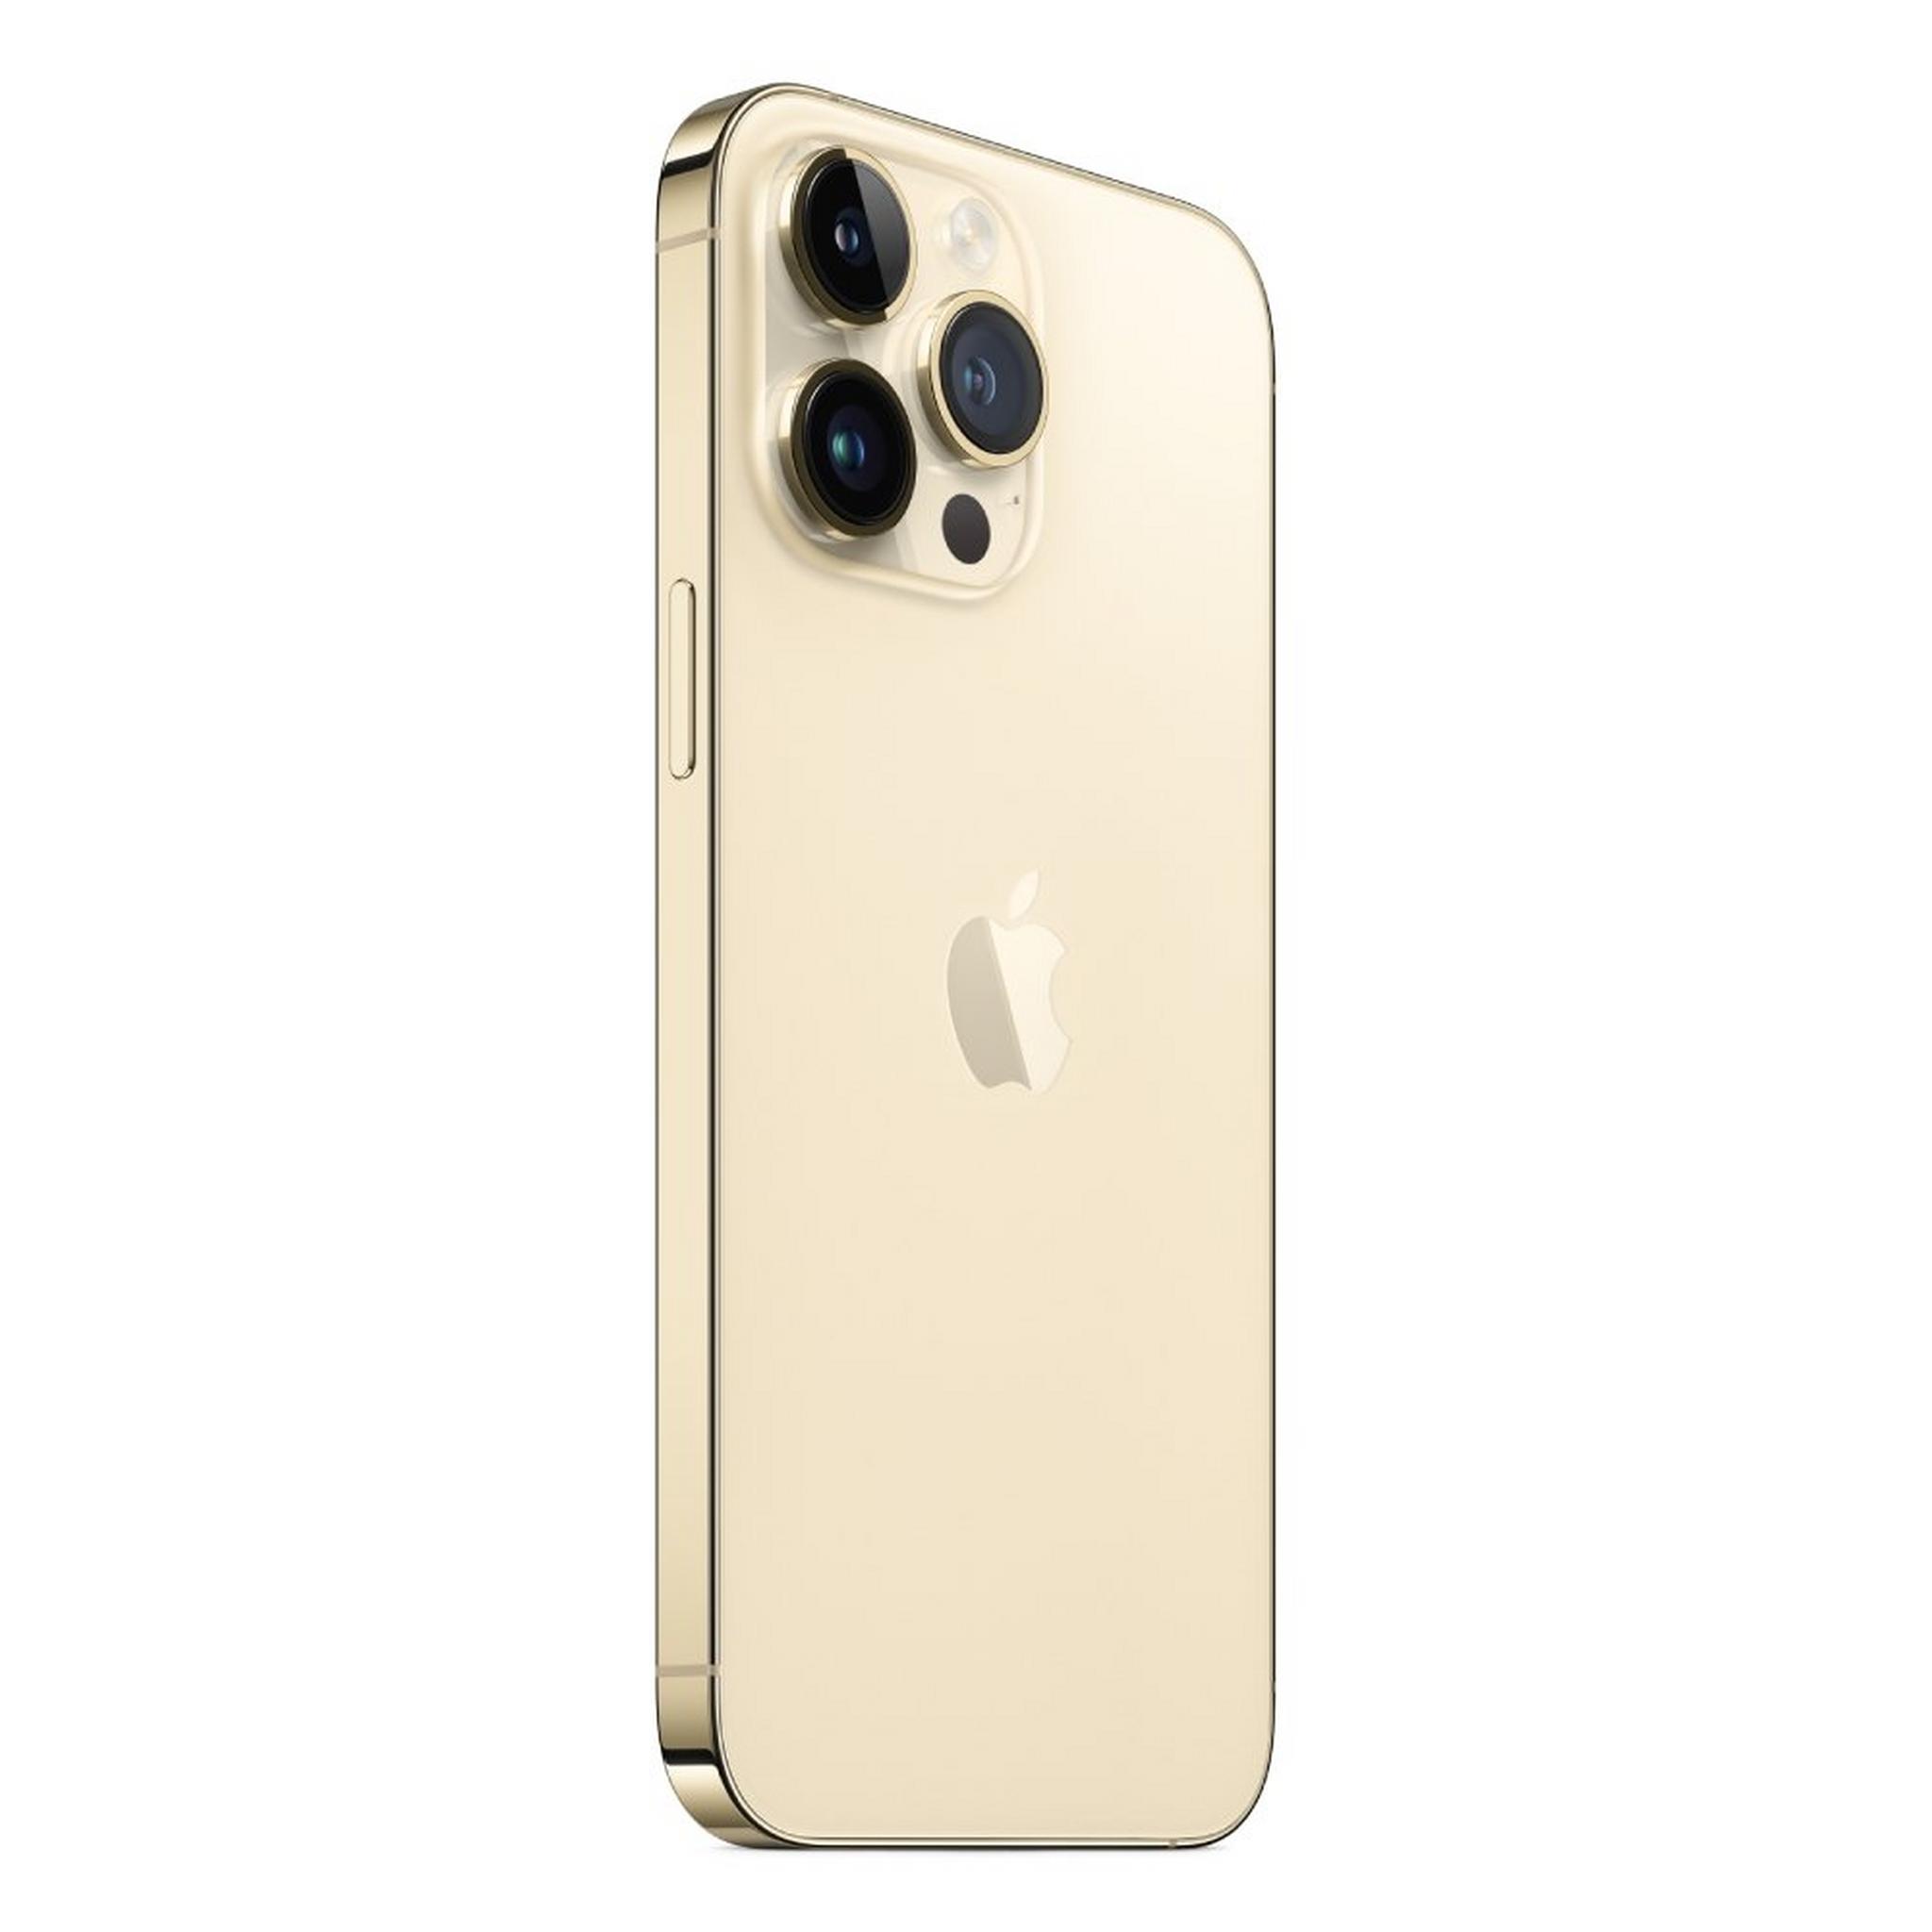 Pre-Order Apple iPhone 14 Pro Max 5G 1TB - Gold